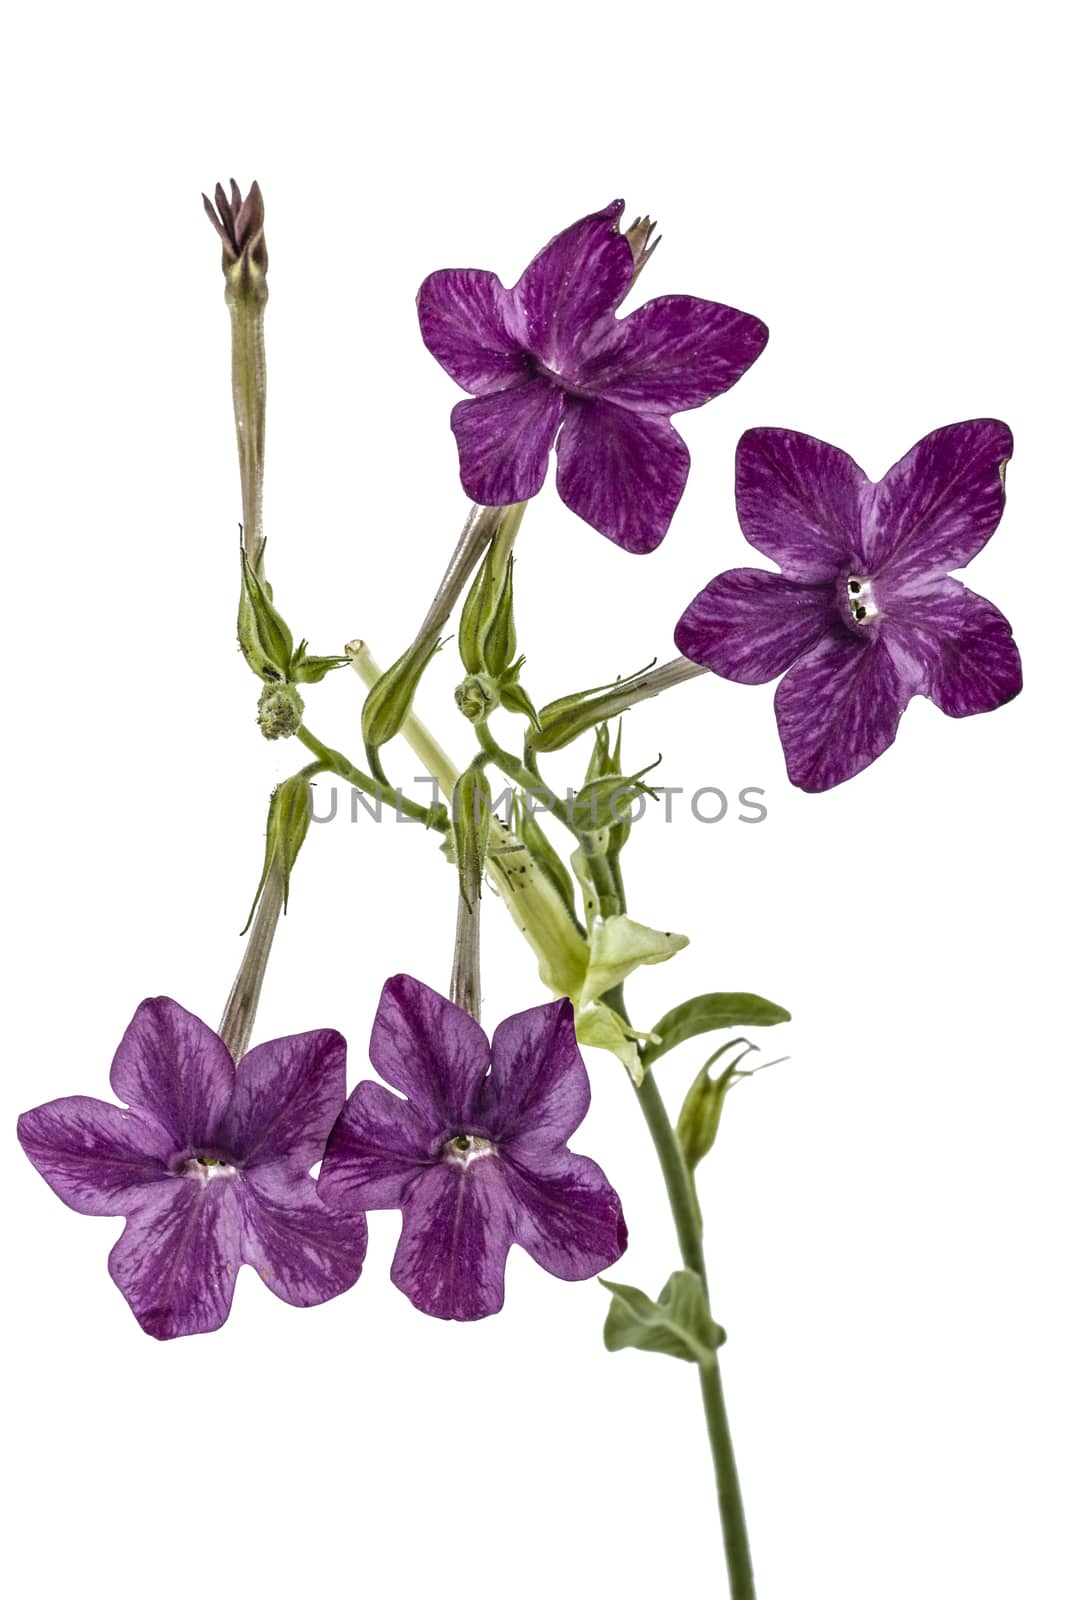 Flowers of tobacco scented, lat.Nicotiana, isolated on white background